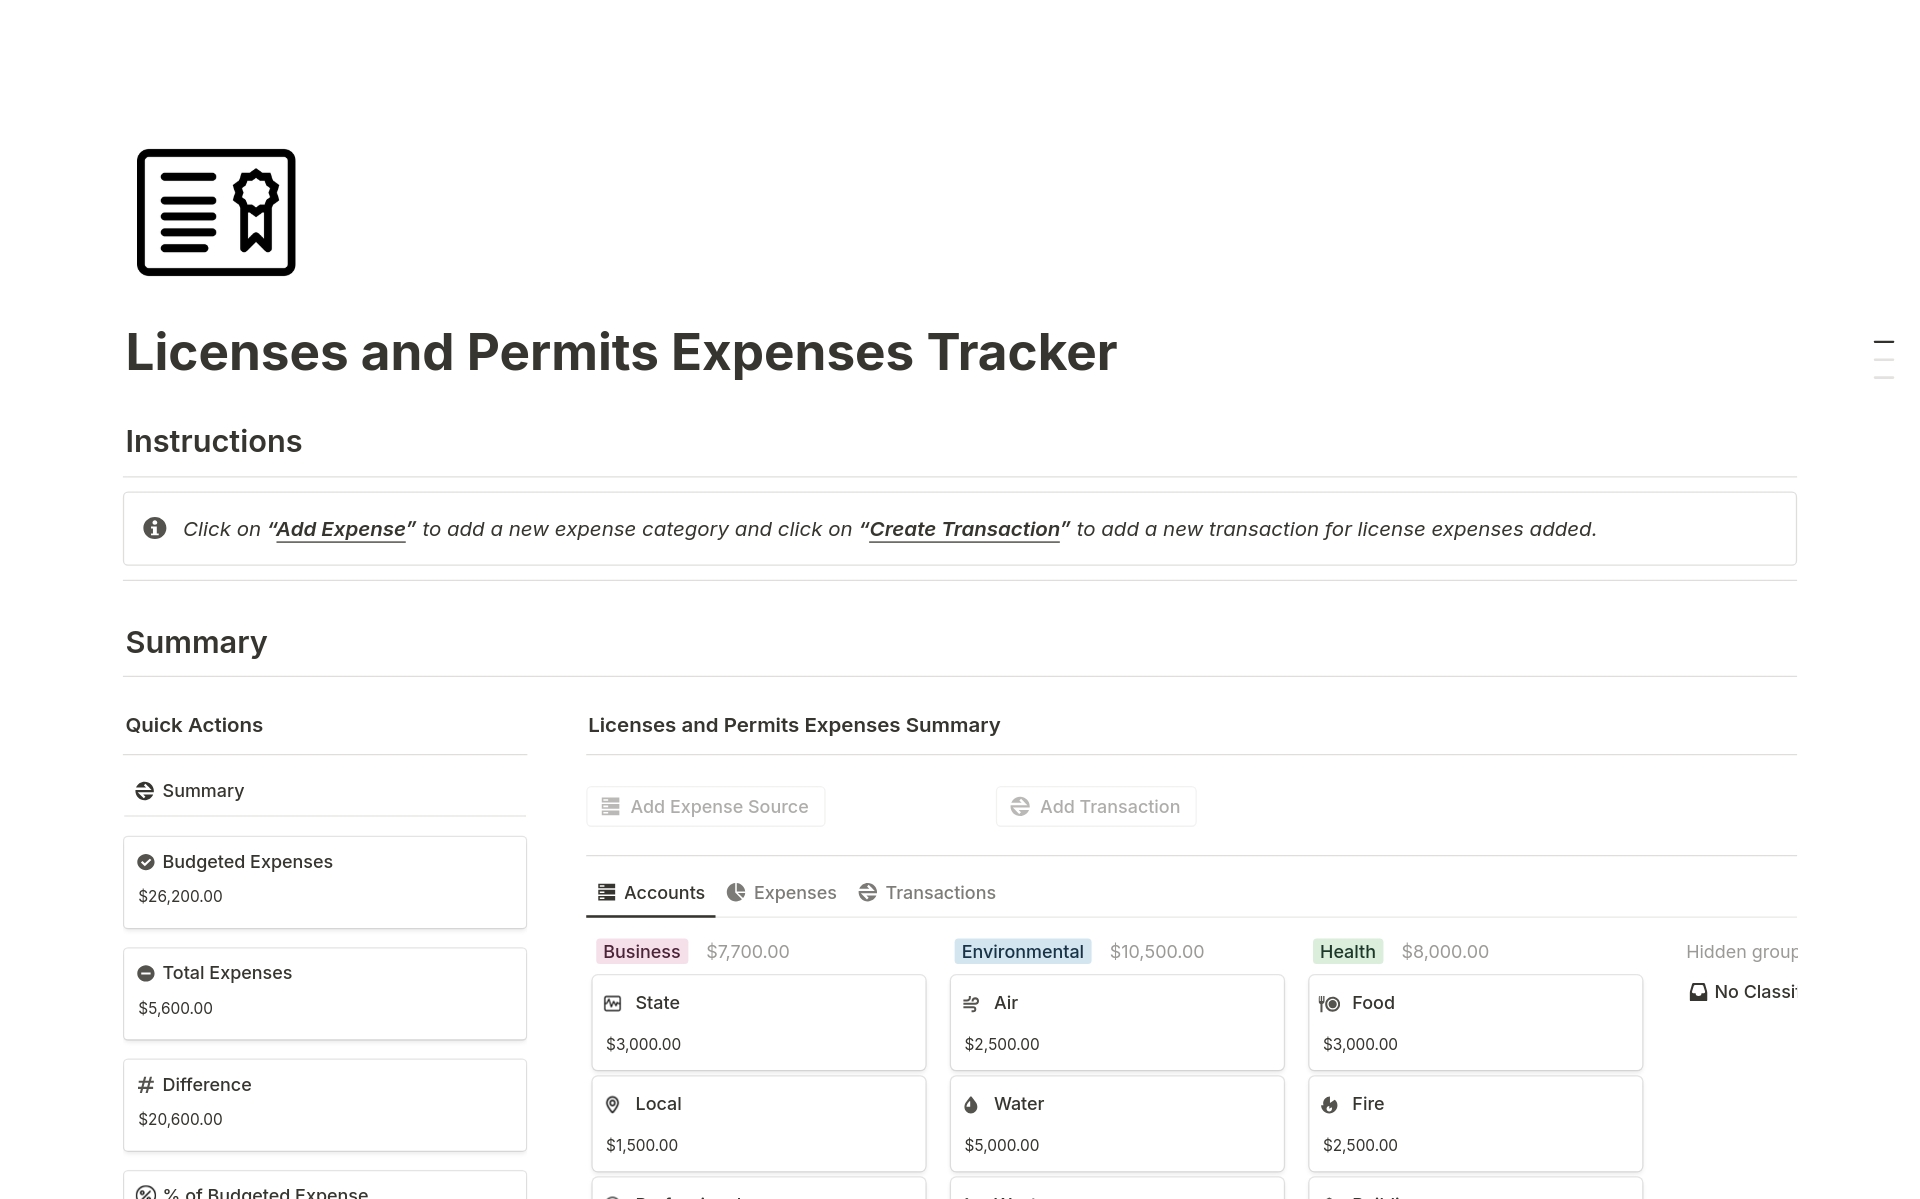 Ideal for those who are looking to manage the license and permit expenses of their business, this tracker helps you keep track of license expenses such as business, health, environment expenses and much more.